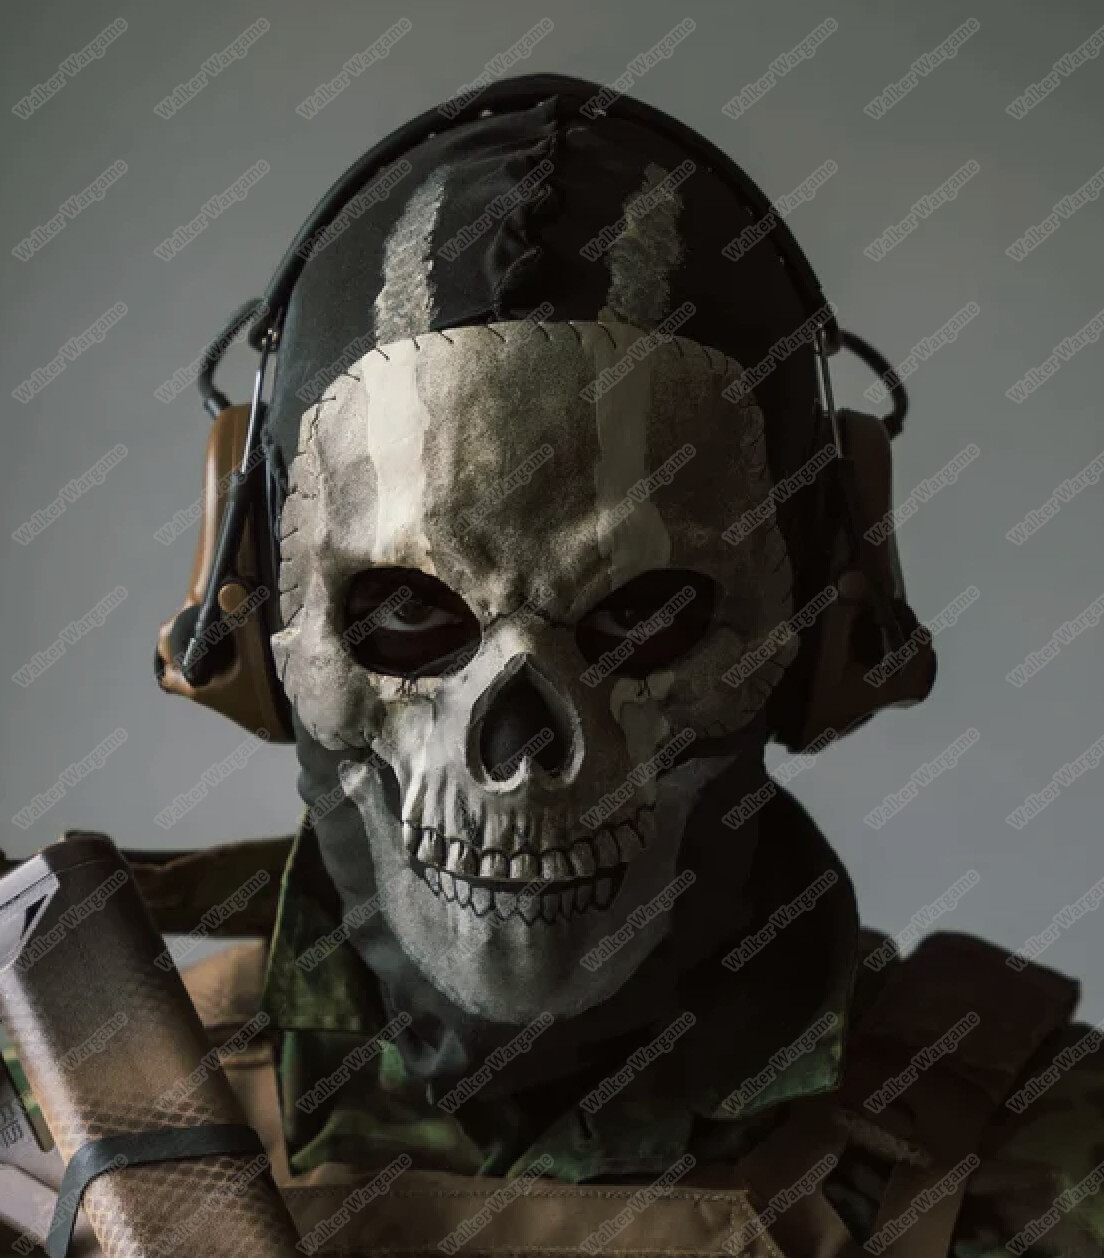 Call Of Duty GHOST MASK 2022 COD